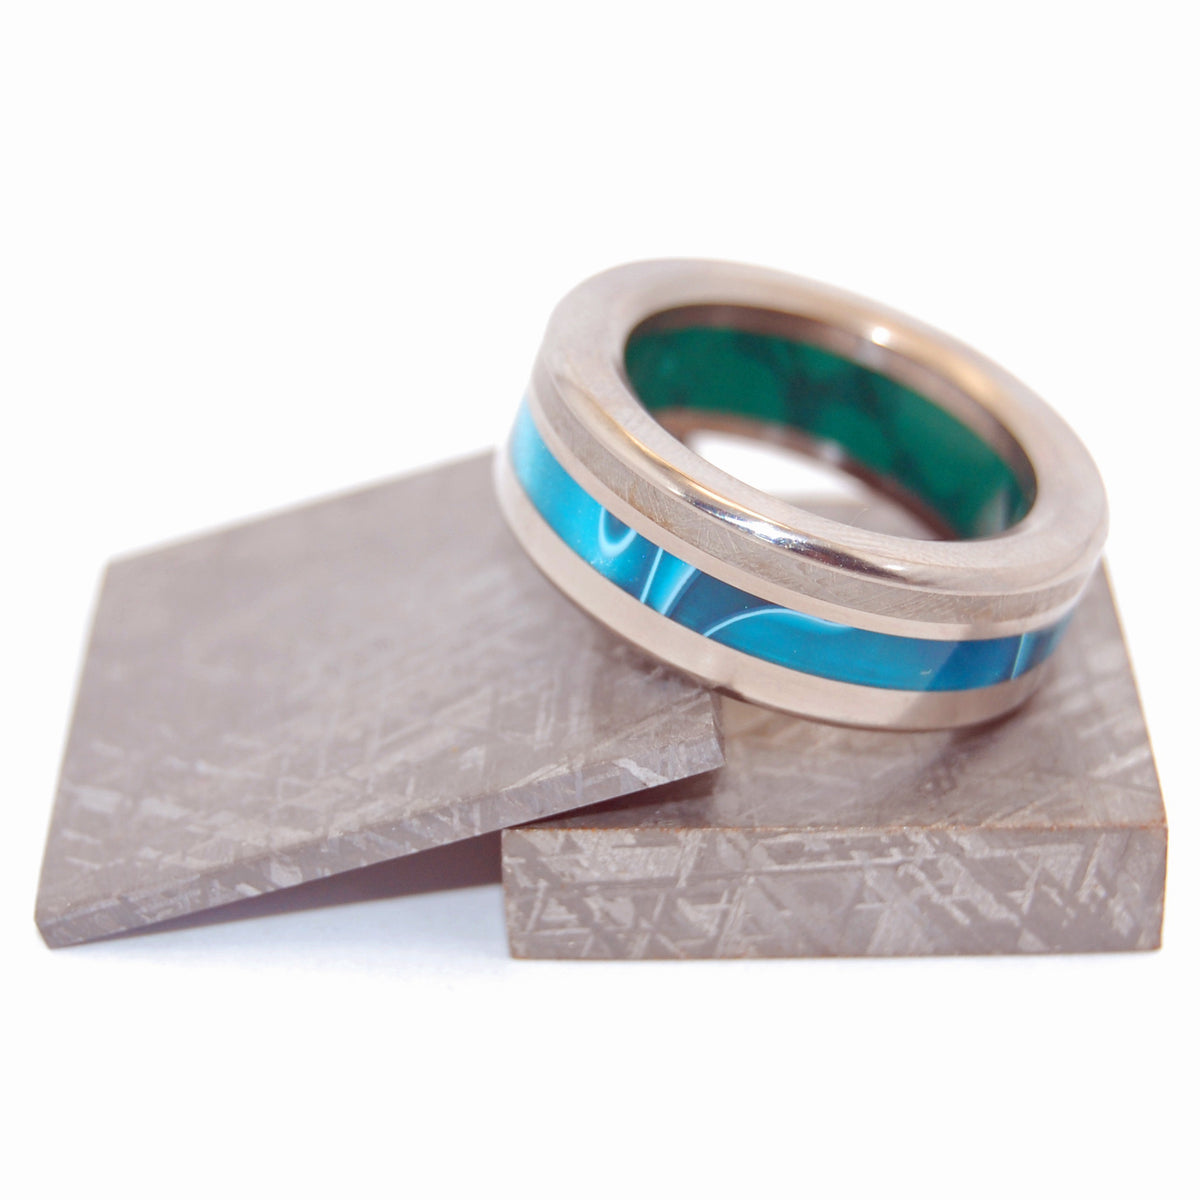 GO BOLD OR GO HOME | Meteorite & Jade Stone & Aquatic Blue Resin Unique Wedding Rings - Minter and Richter Designs